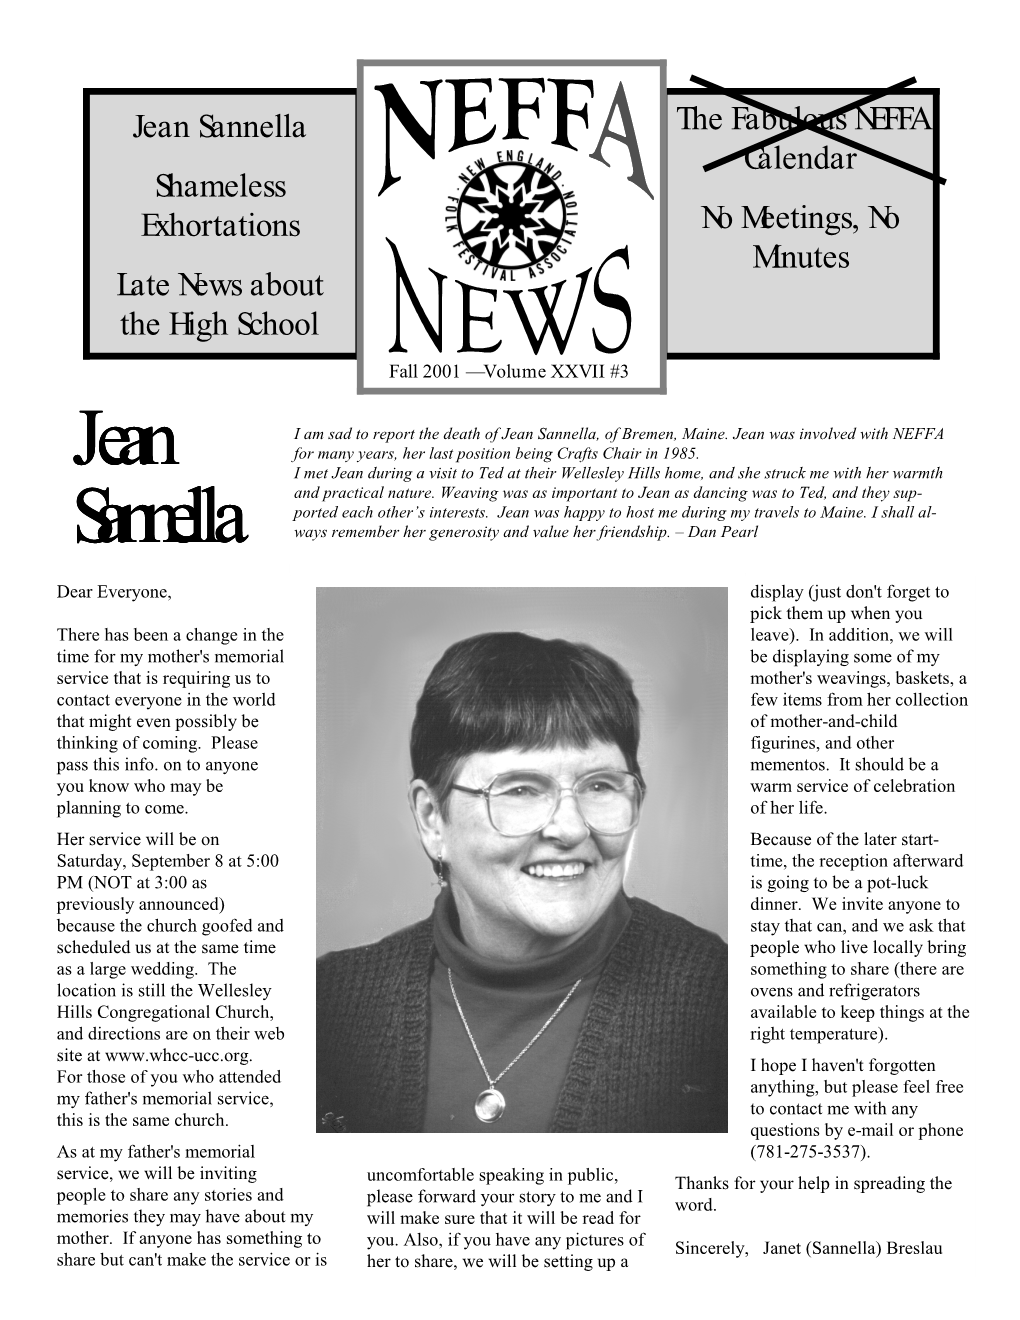 Jean Sannella the Fabulous NEFFA Calendar Shameless Exhortations No Meetings, No Minutes Late News About the High School